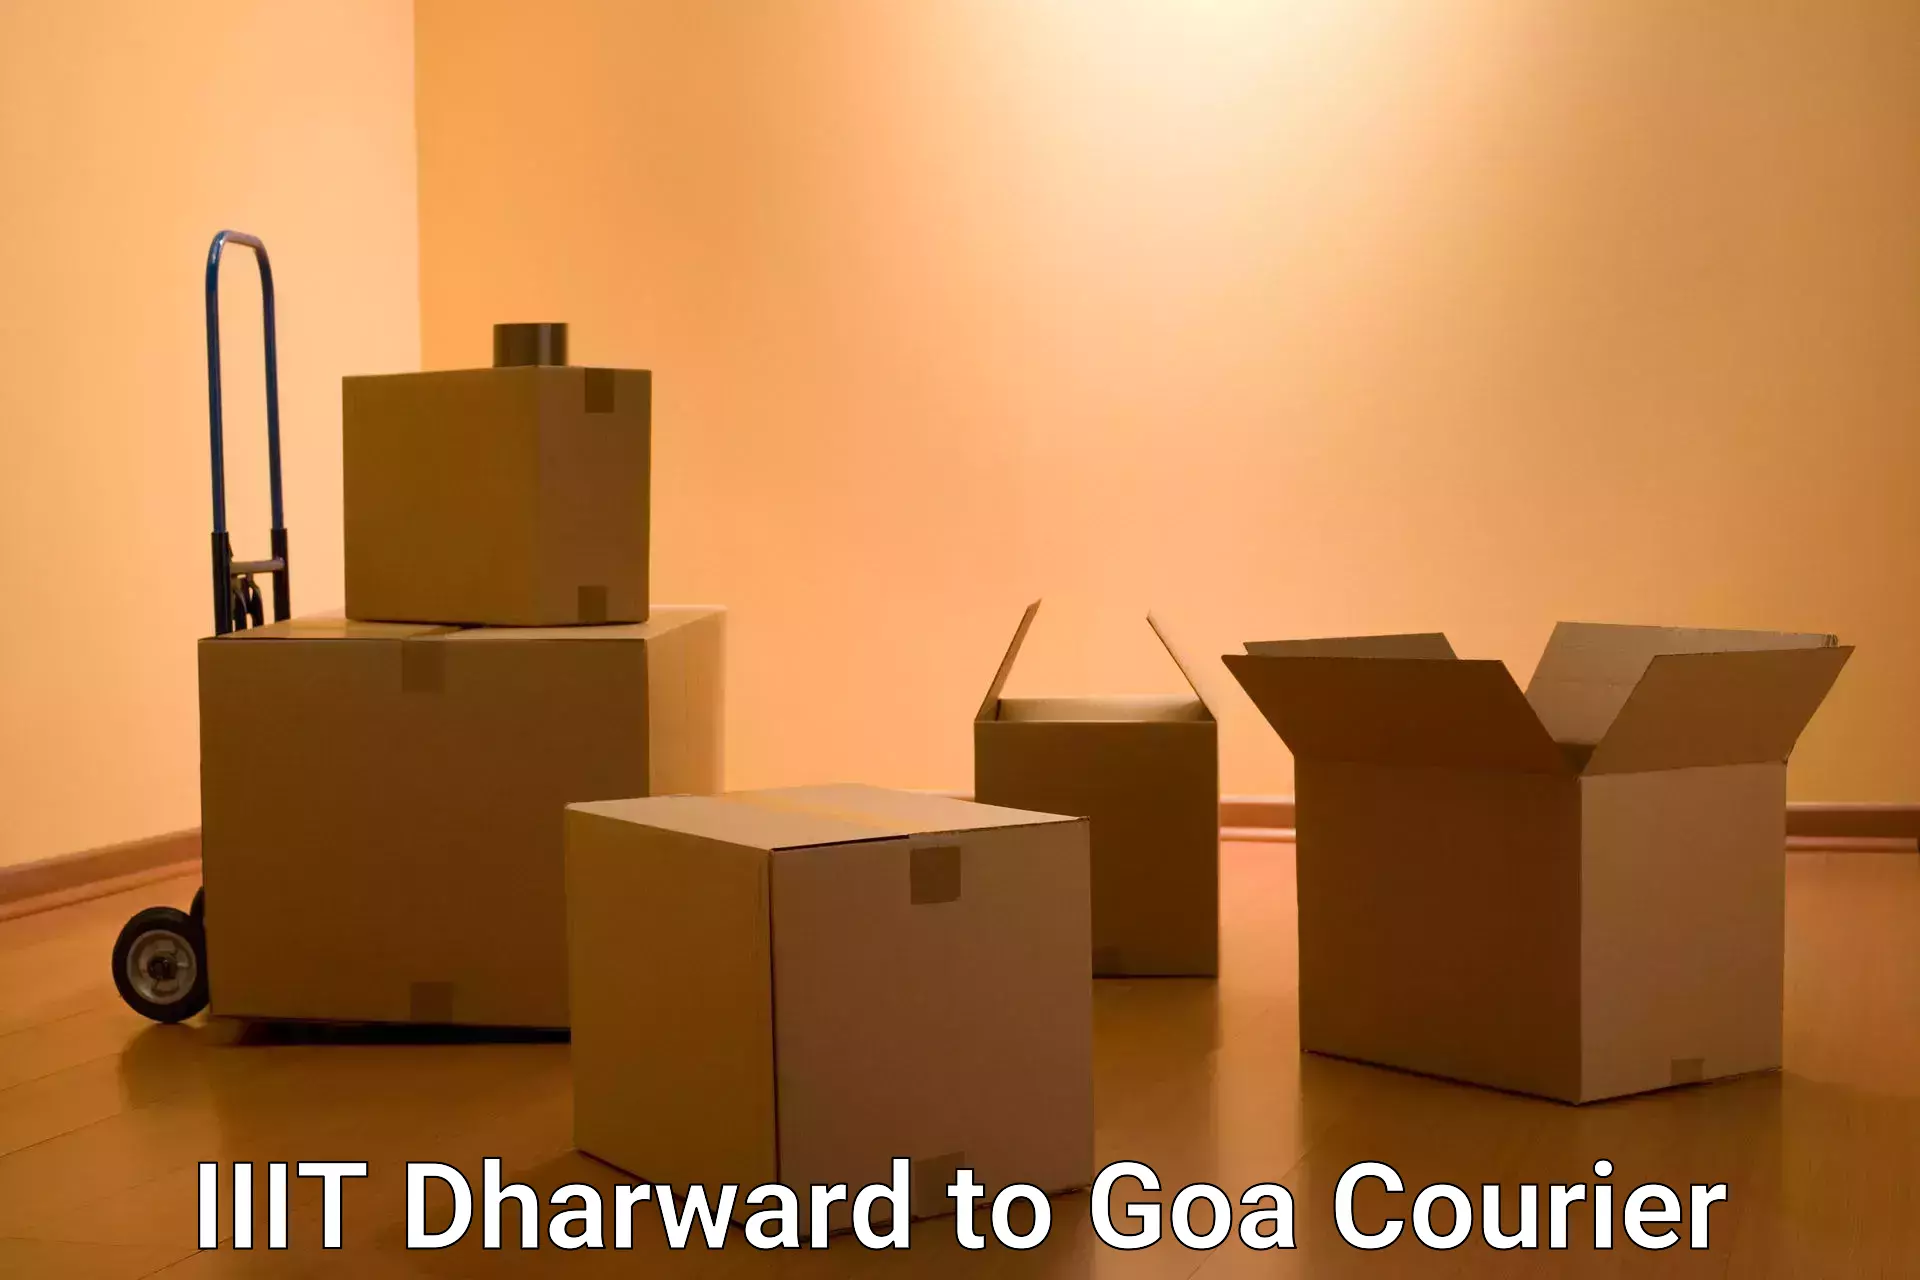 Multi-service courier options IIIT Dharward to Goa